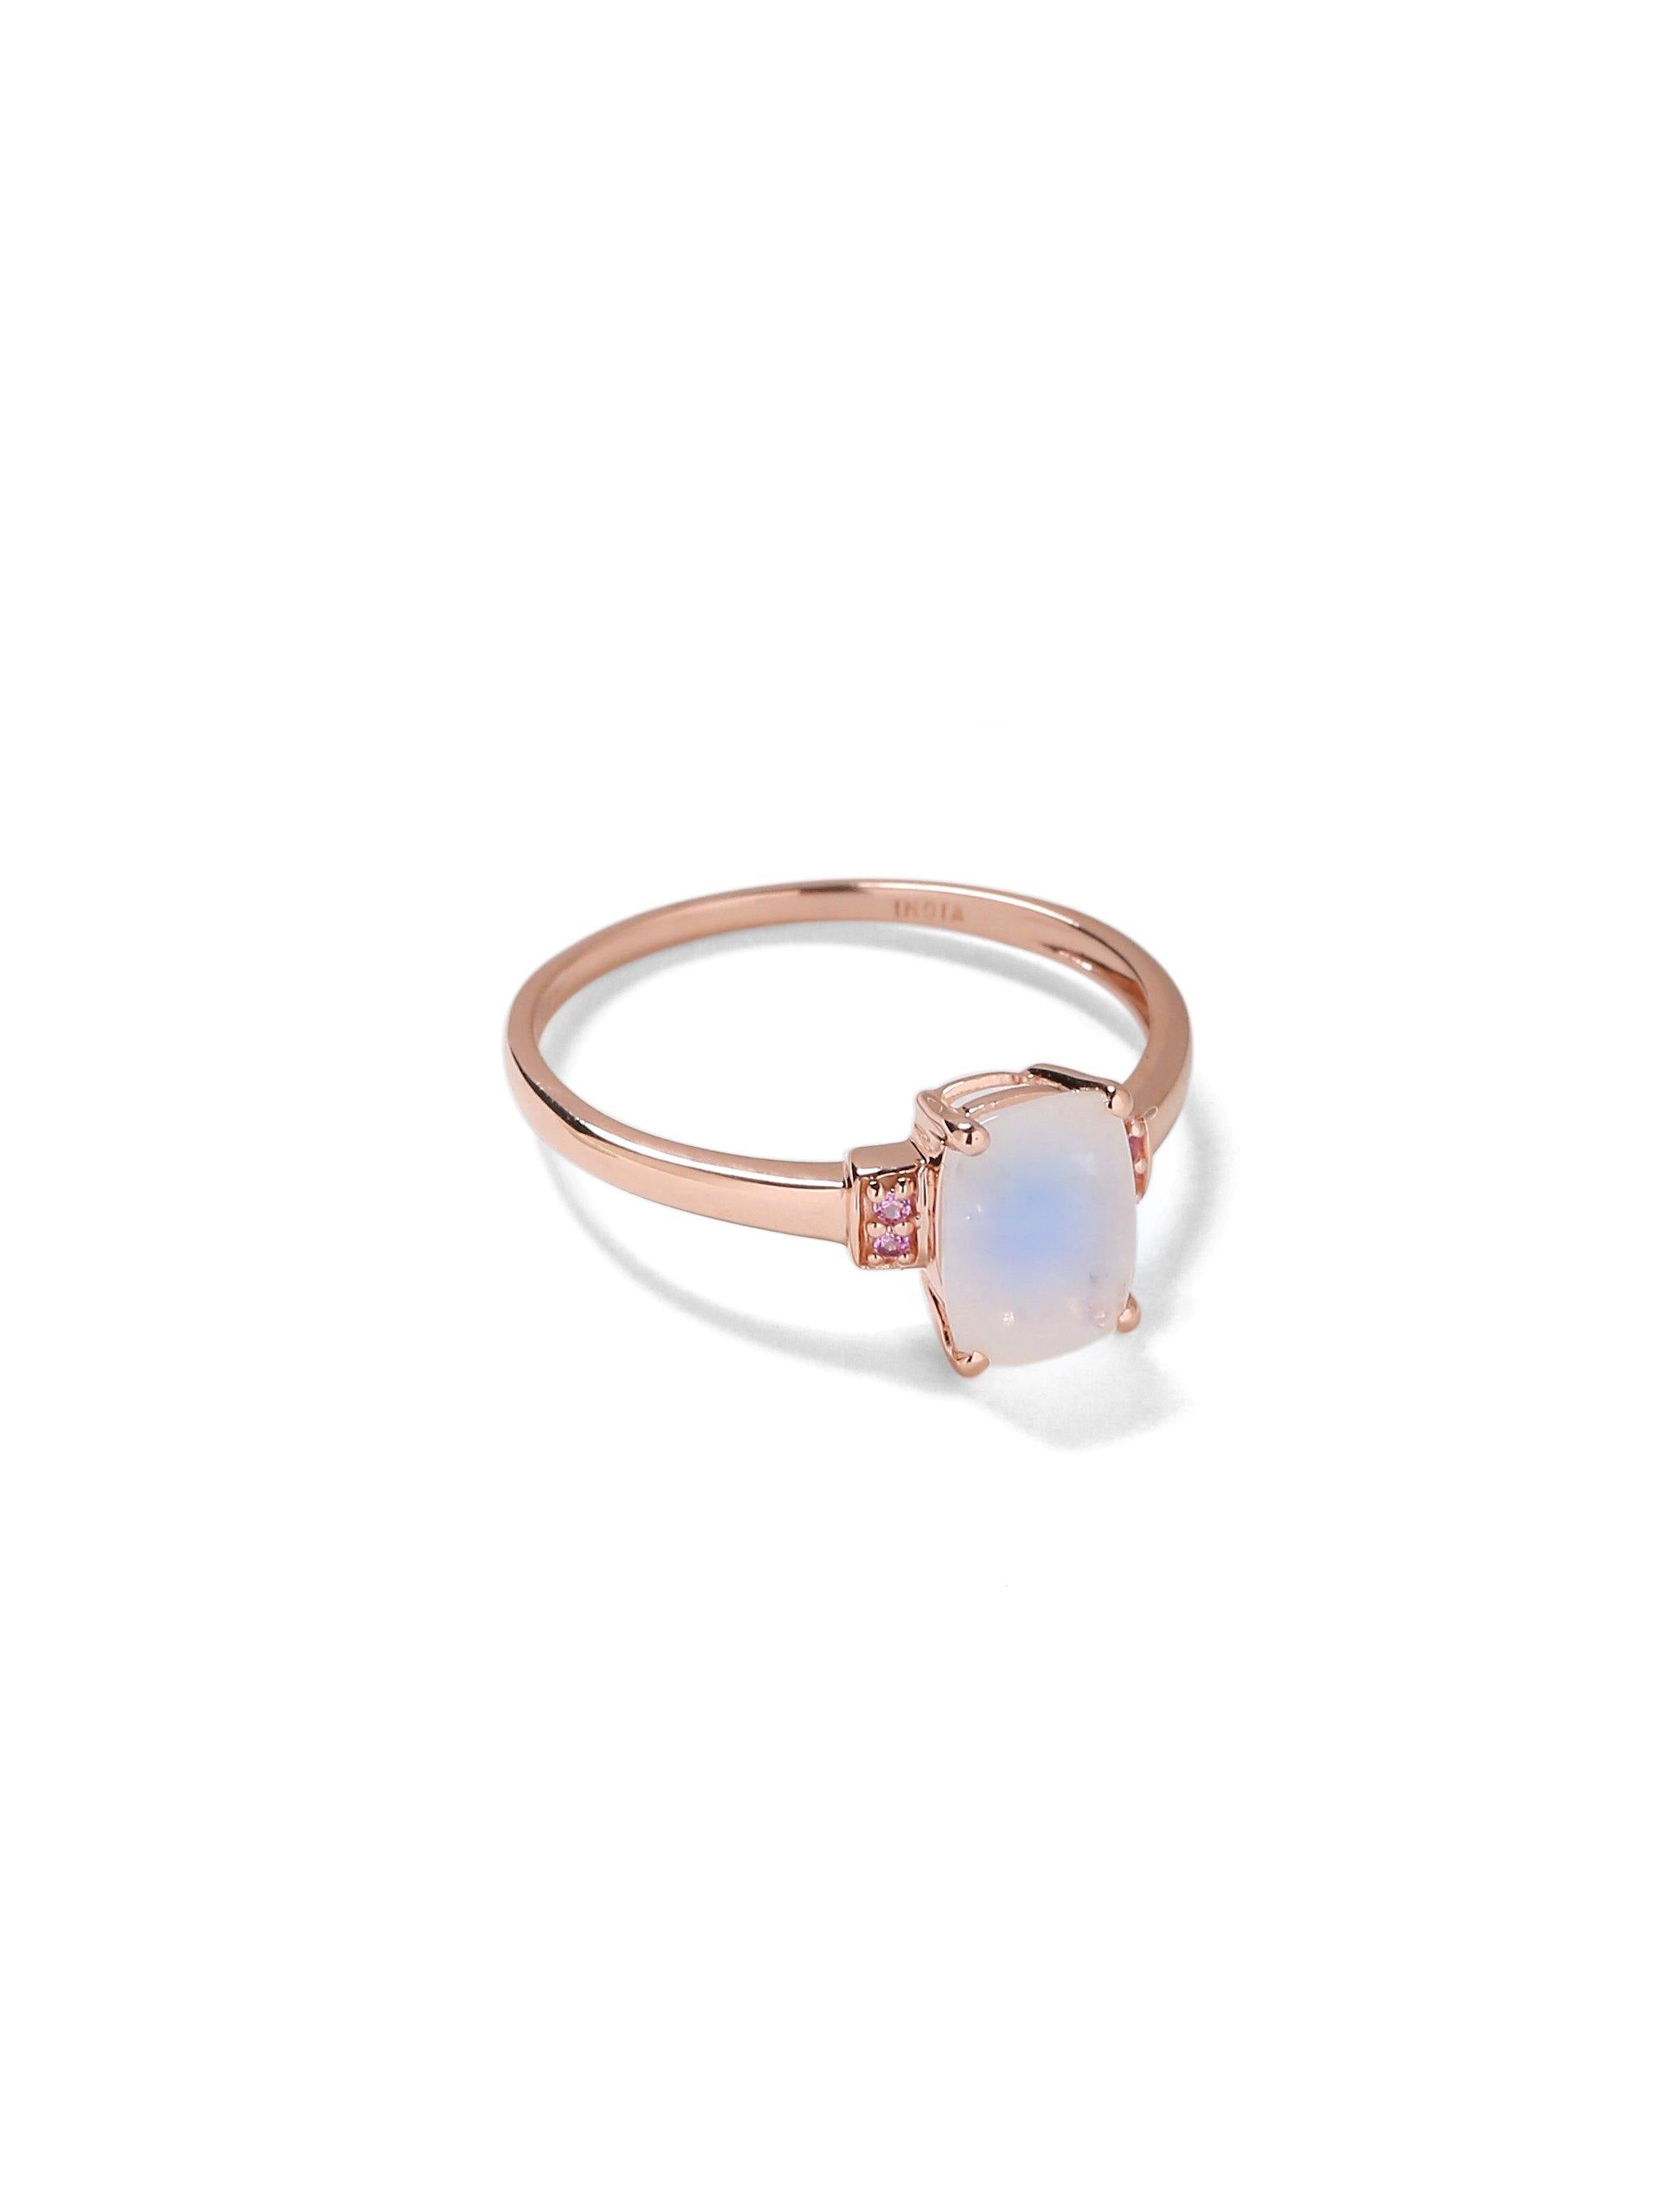 1.72 Cts Moonstone Pink Sapphire Solid 10k Rose Gold Princess Ring Jewelry - YoTreasure